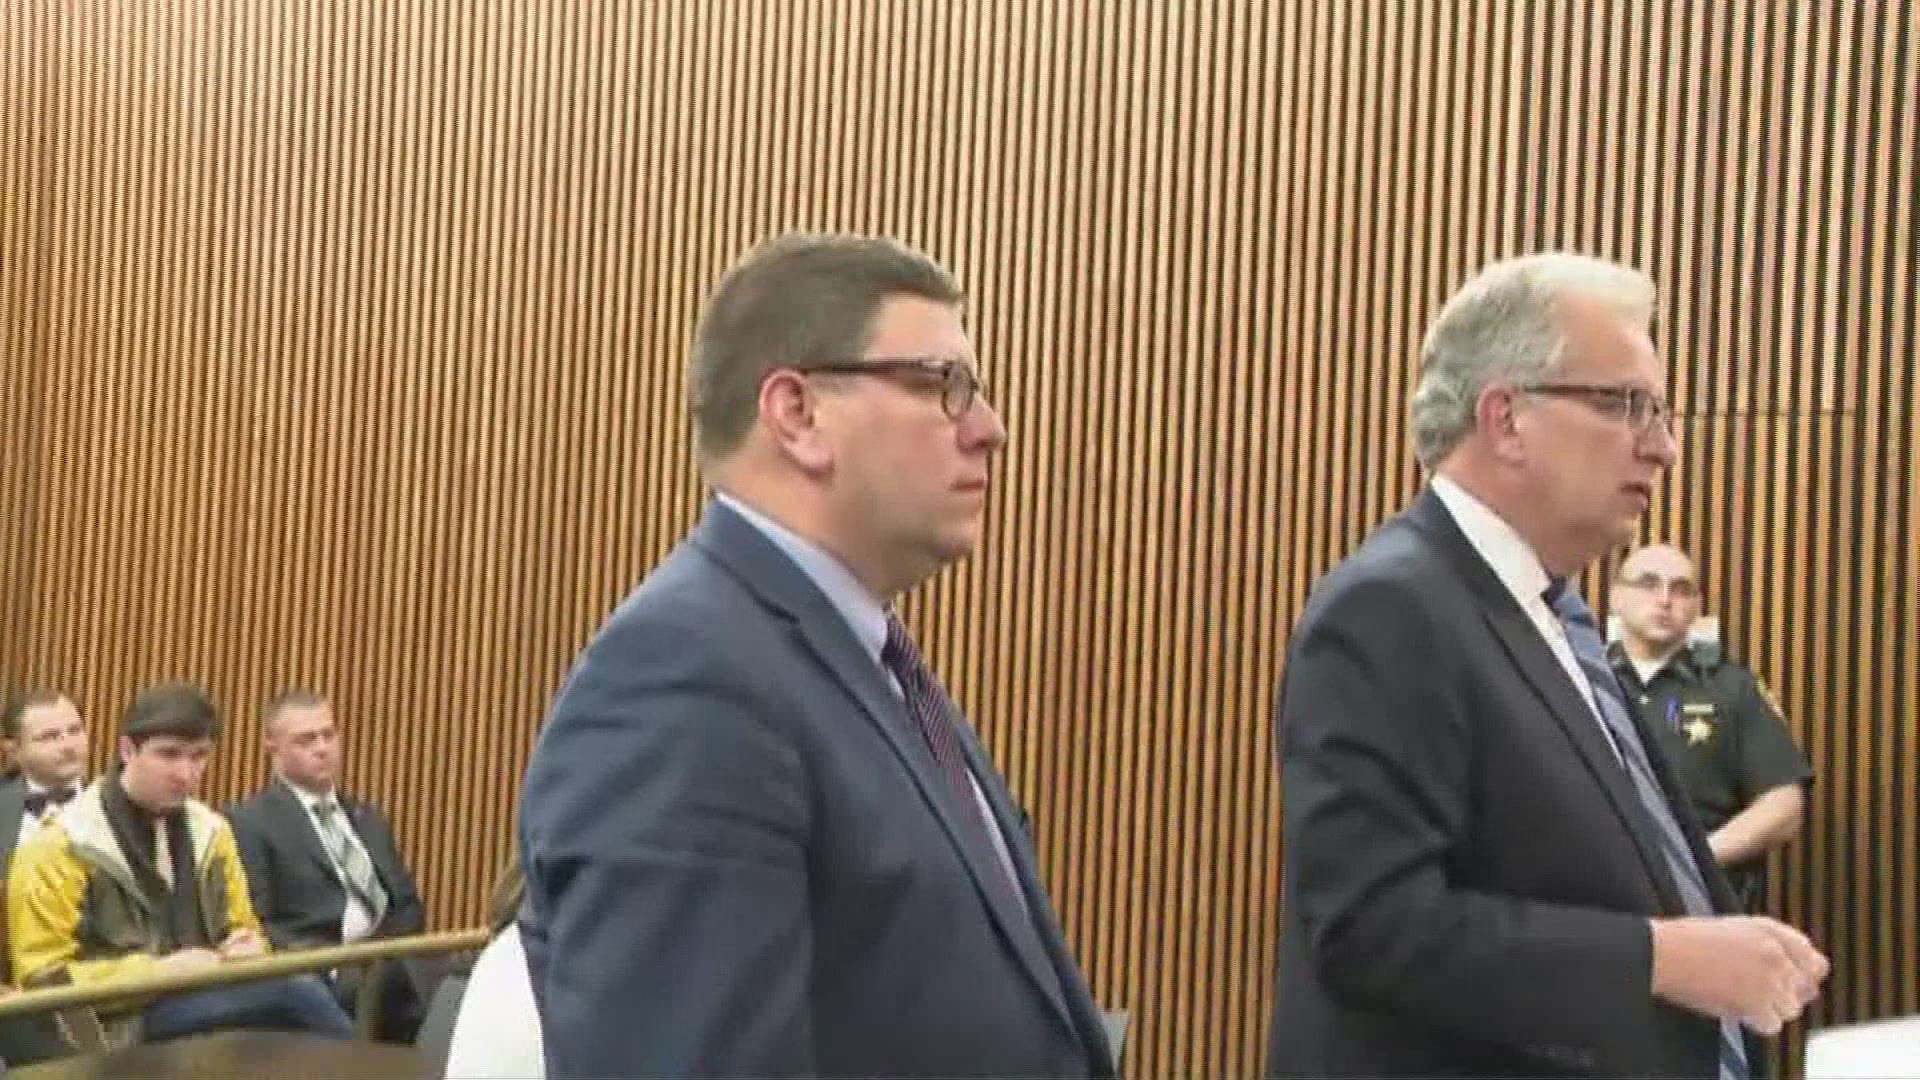 April 27, 2018: Former Cleveland City Councilman Joe Cimperman pleaded guilty to 26 misdemeanor charges during a brief court hearing. The judge assigned the case for another hearing on Tuesday, May 8 at 9 a.m.